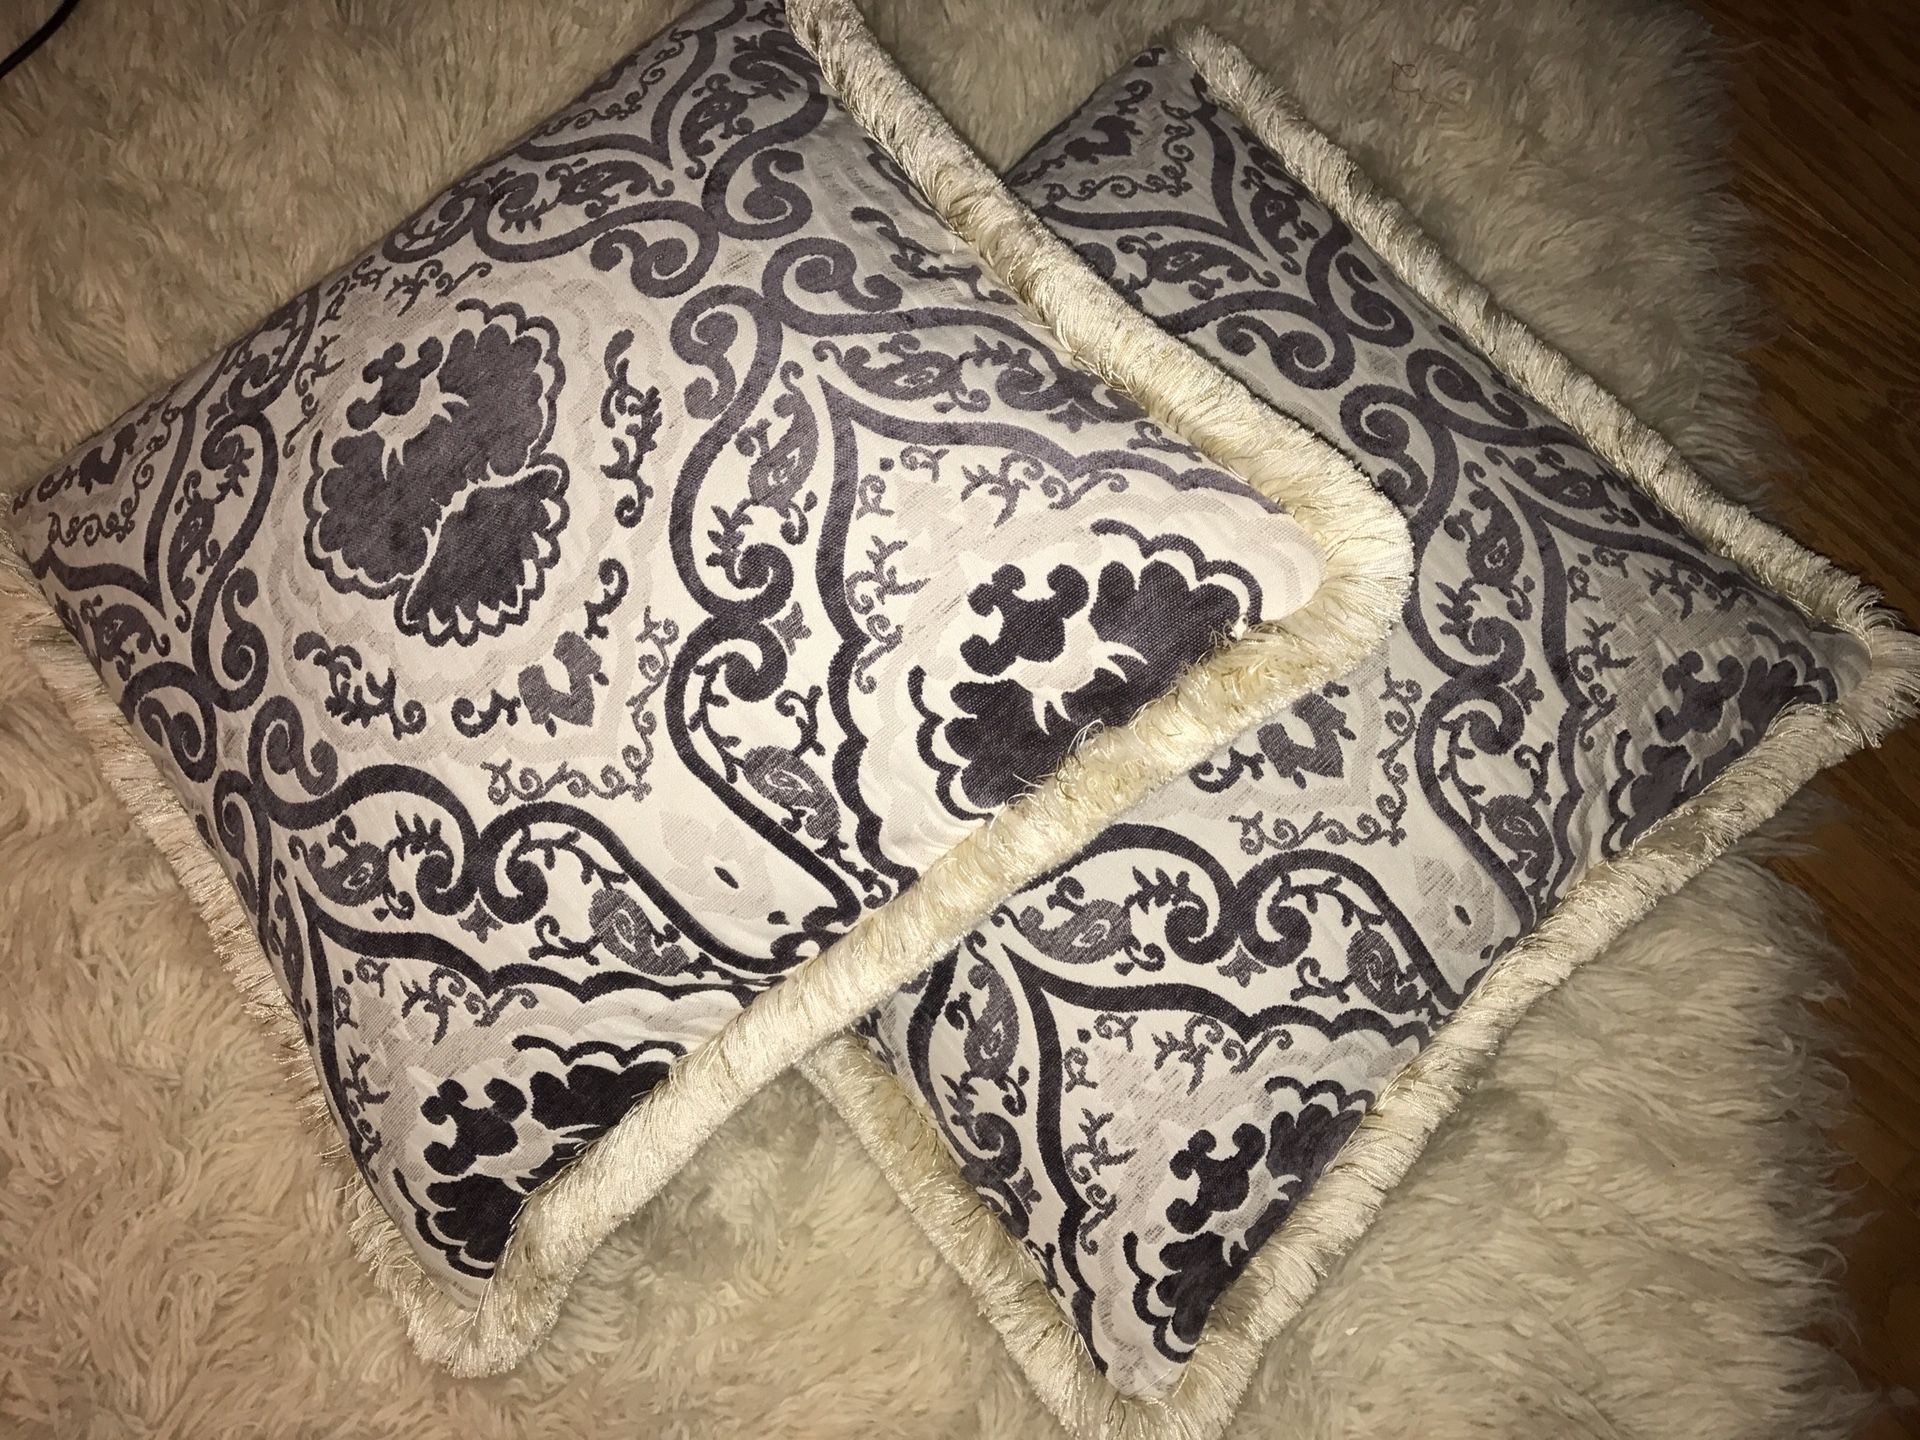 Two oversized decorative pillows (2 ft. Squares) $25